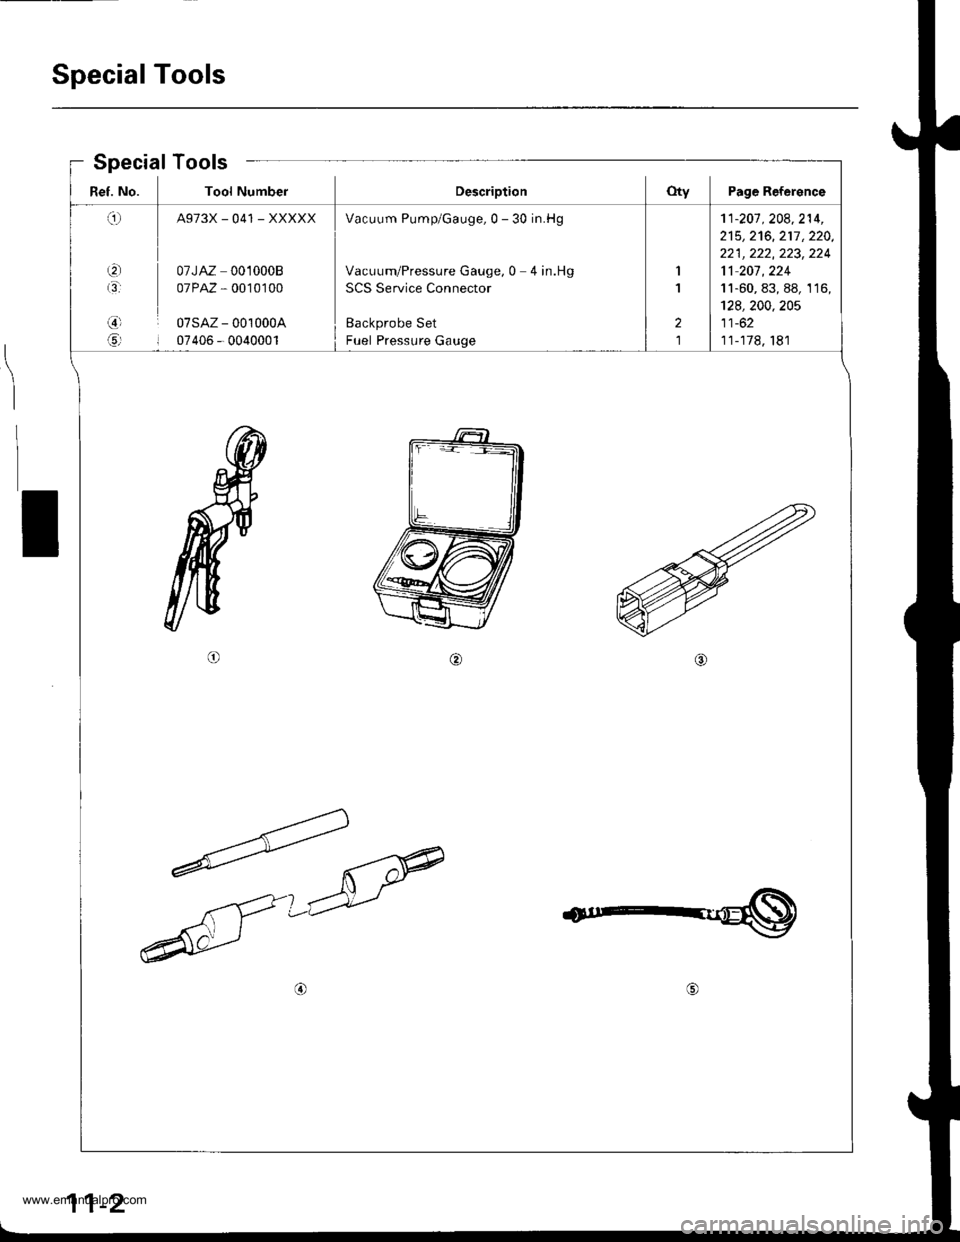 HONDA CR-V 1999 RD1-RD3 / 1.G Workshop Manual 
Special Tools
Ref. No. Tool NumberDescriptionOty Page Reference
q
t3
,3)l
6rl
A973X_041 _XXXXX
07JAZ 0010008
07PAZ , 0010100
07sAz - 001000A
07405 - 0040001
Vacuum Pump/Gauge,0 - 30 in.Hg
Vacuum/Pre